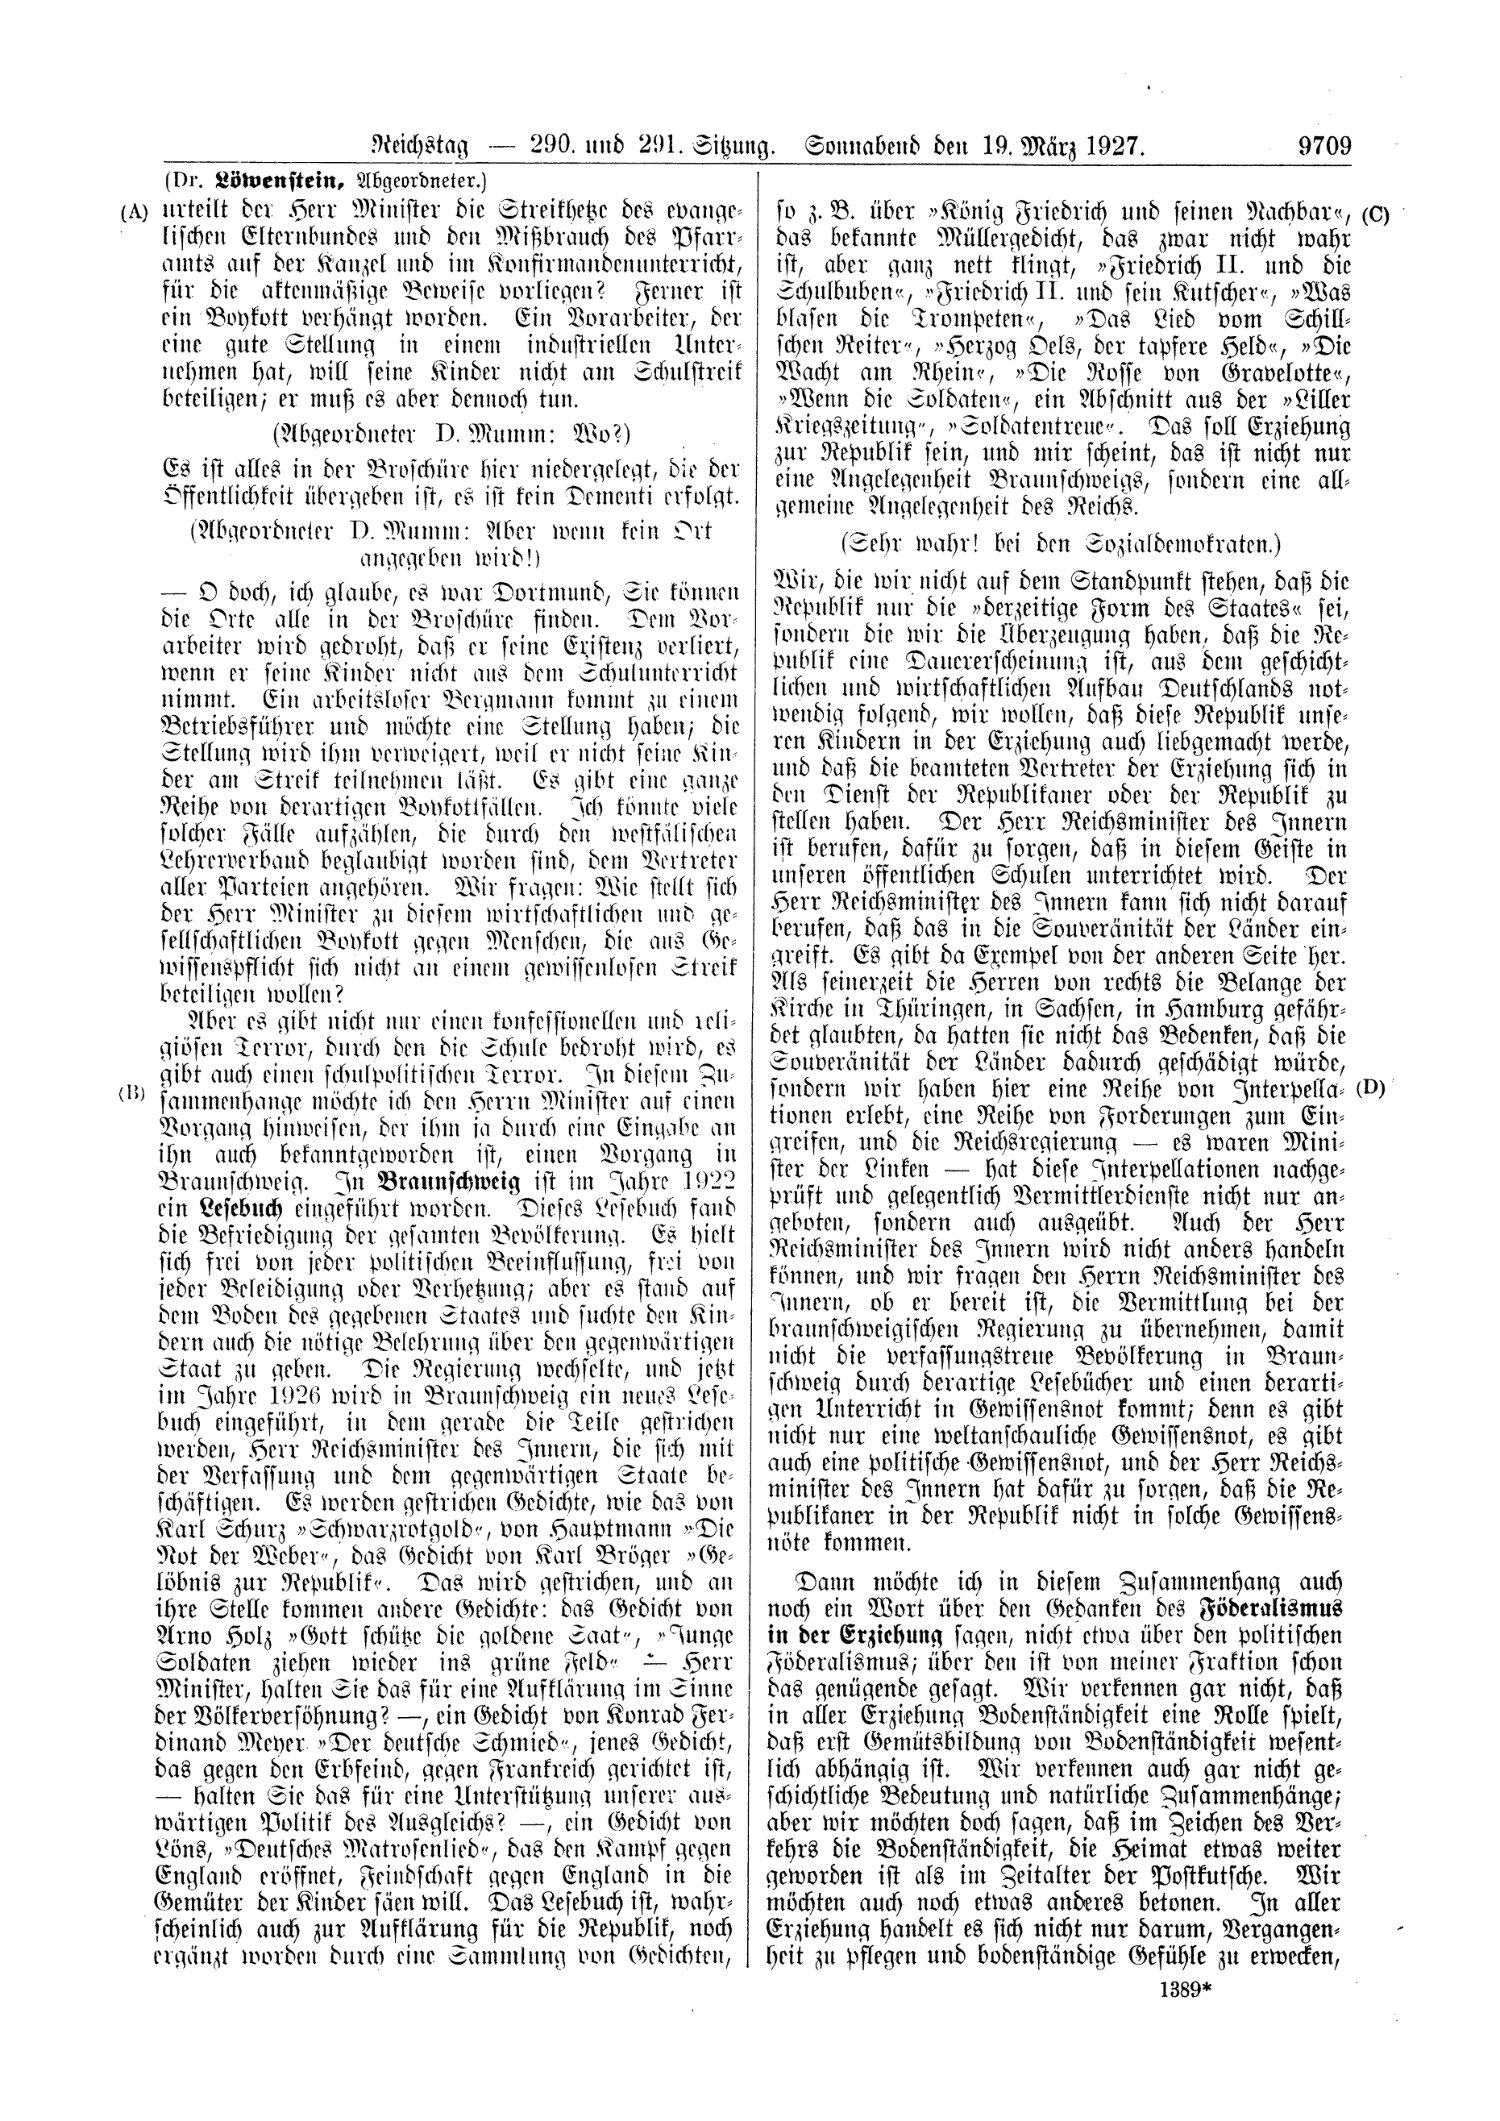 Scan of page 9709